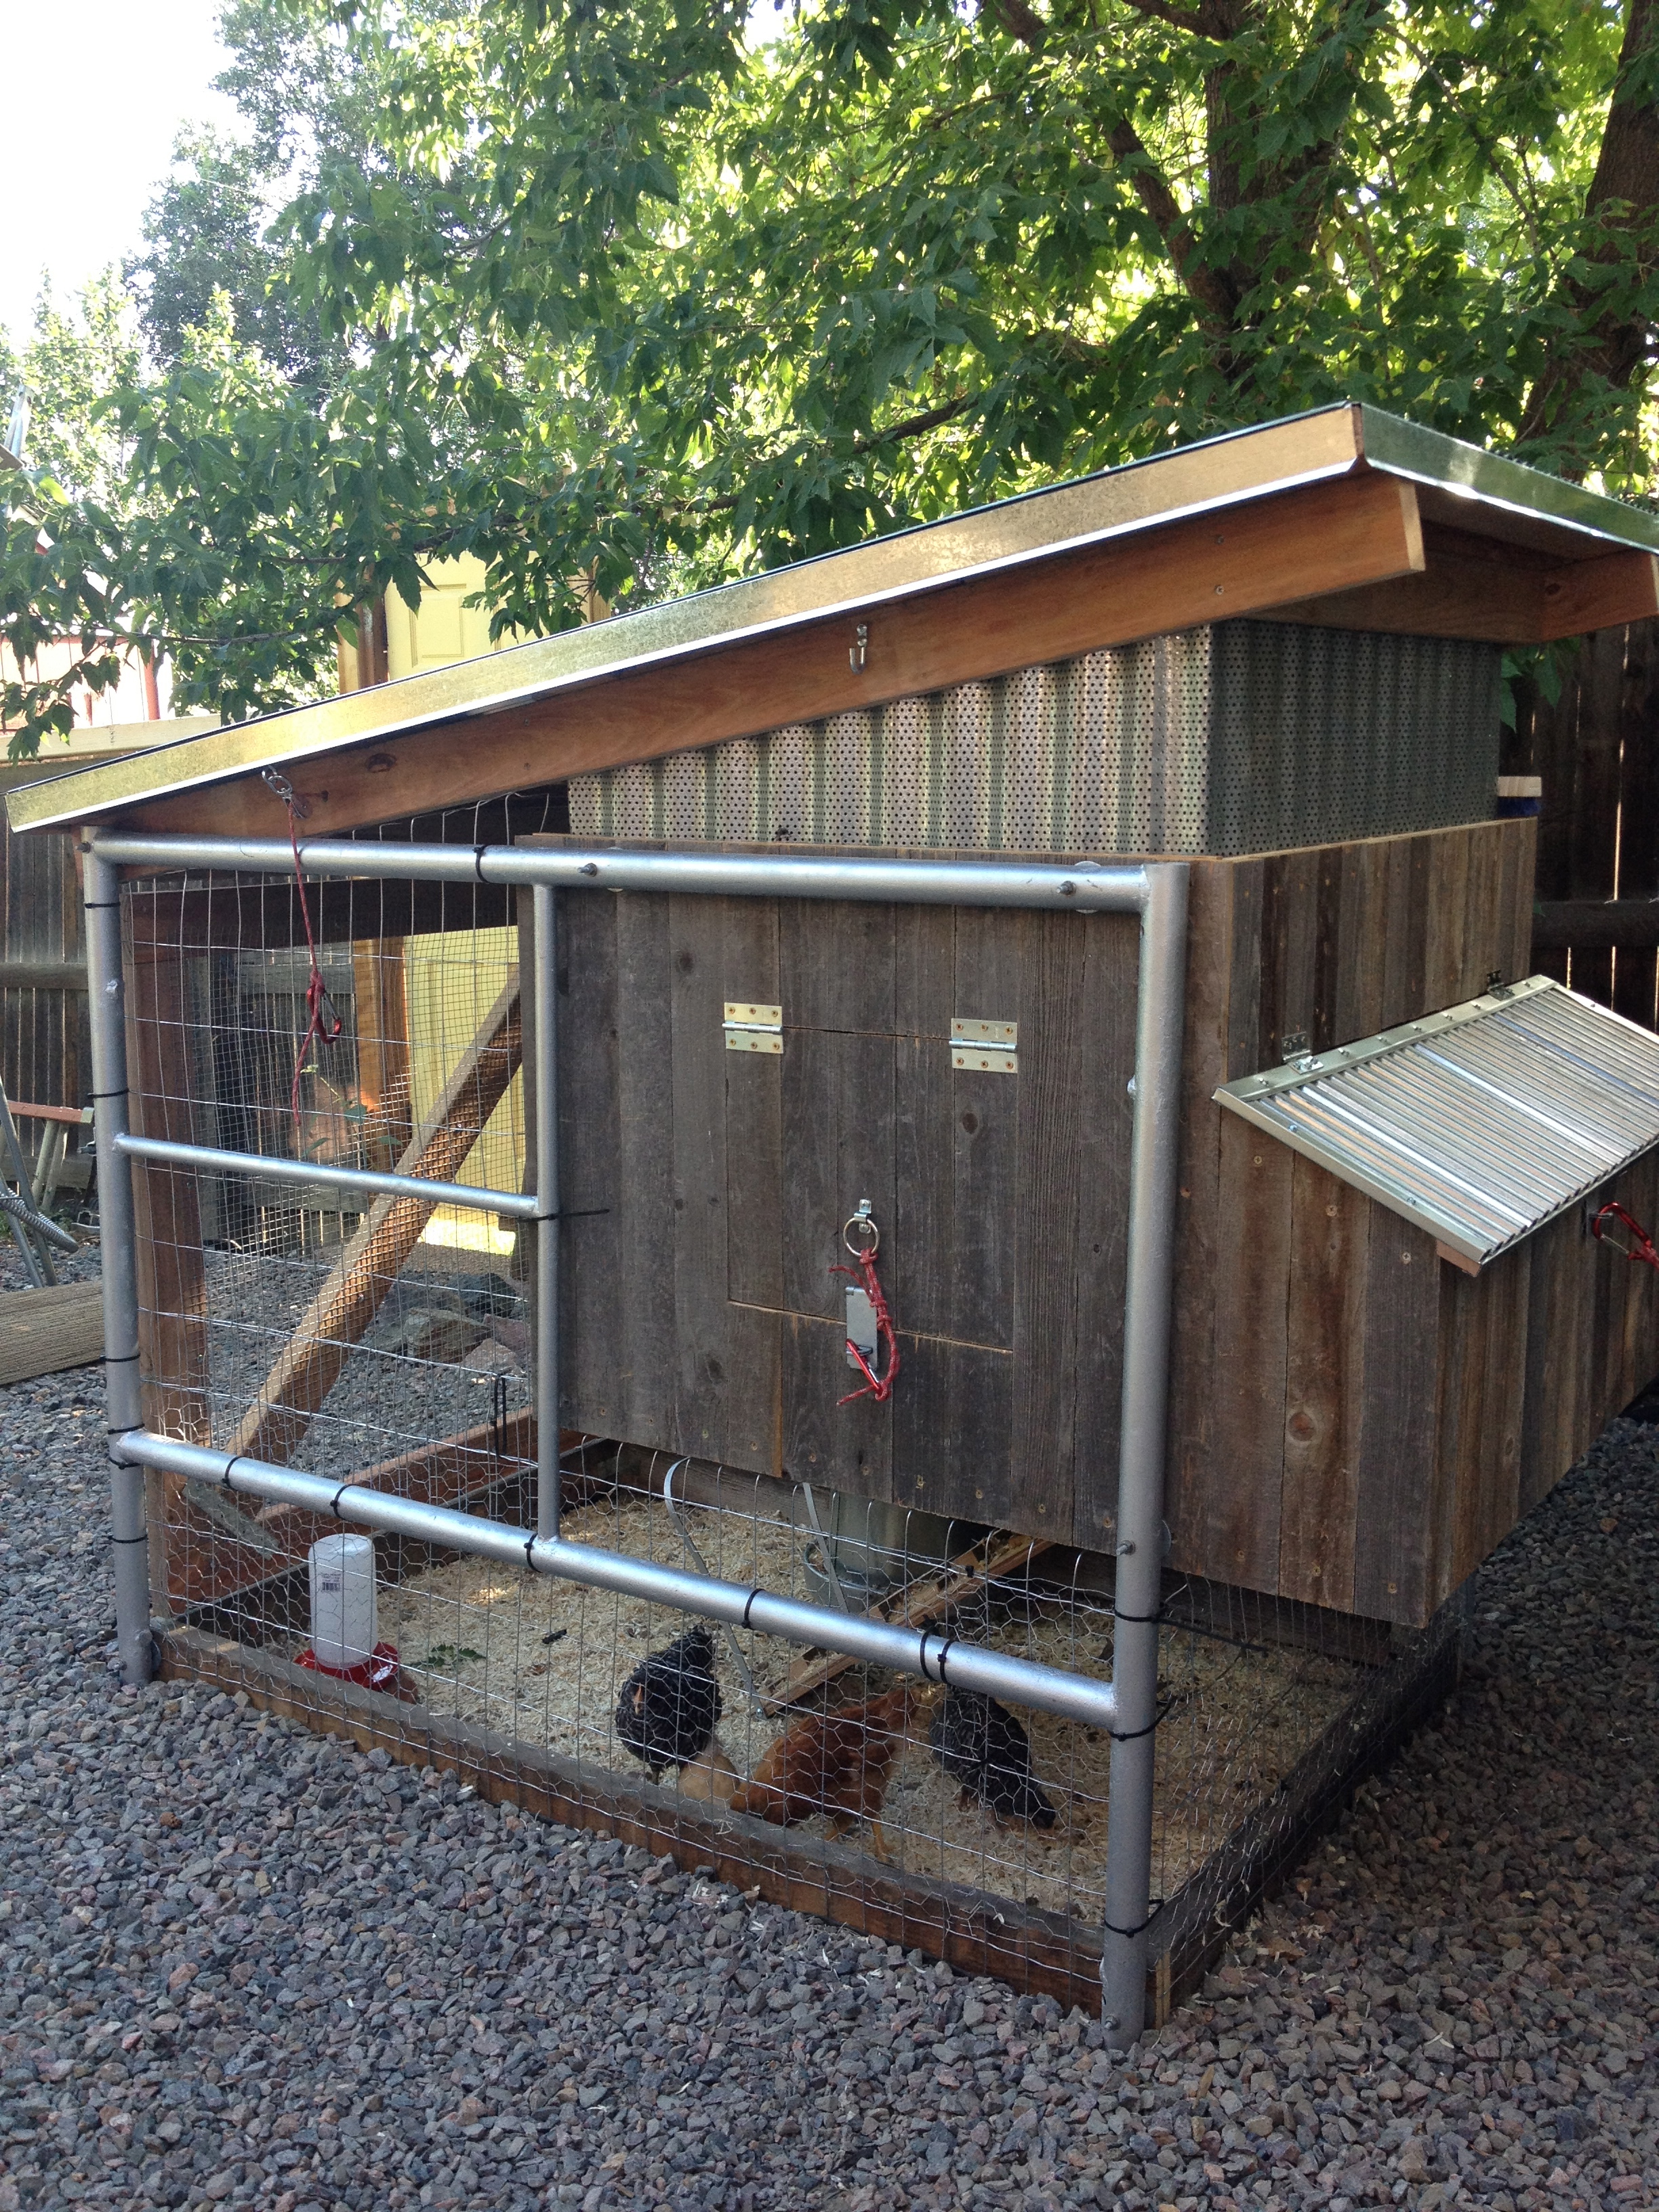 The coop made mostly of recycled fence and painting scaffold